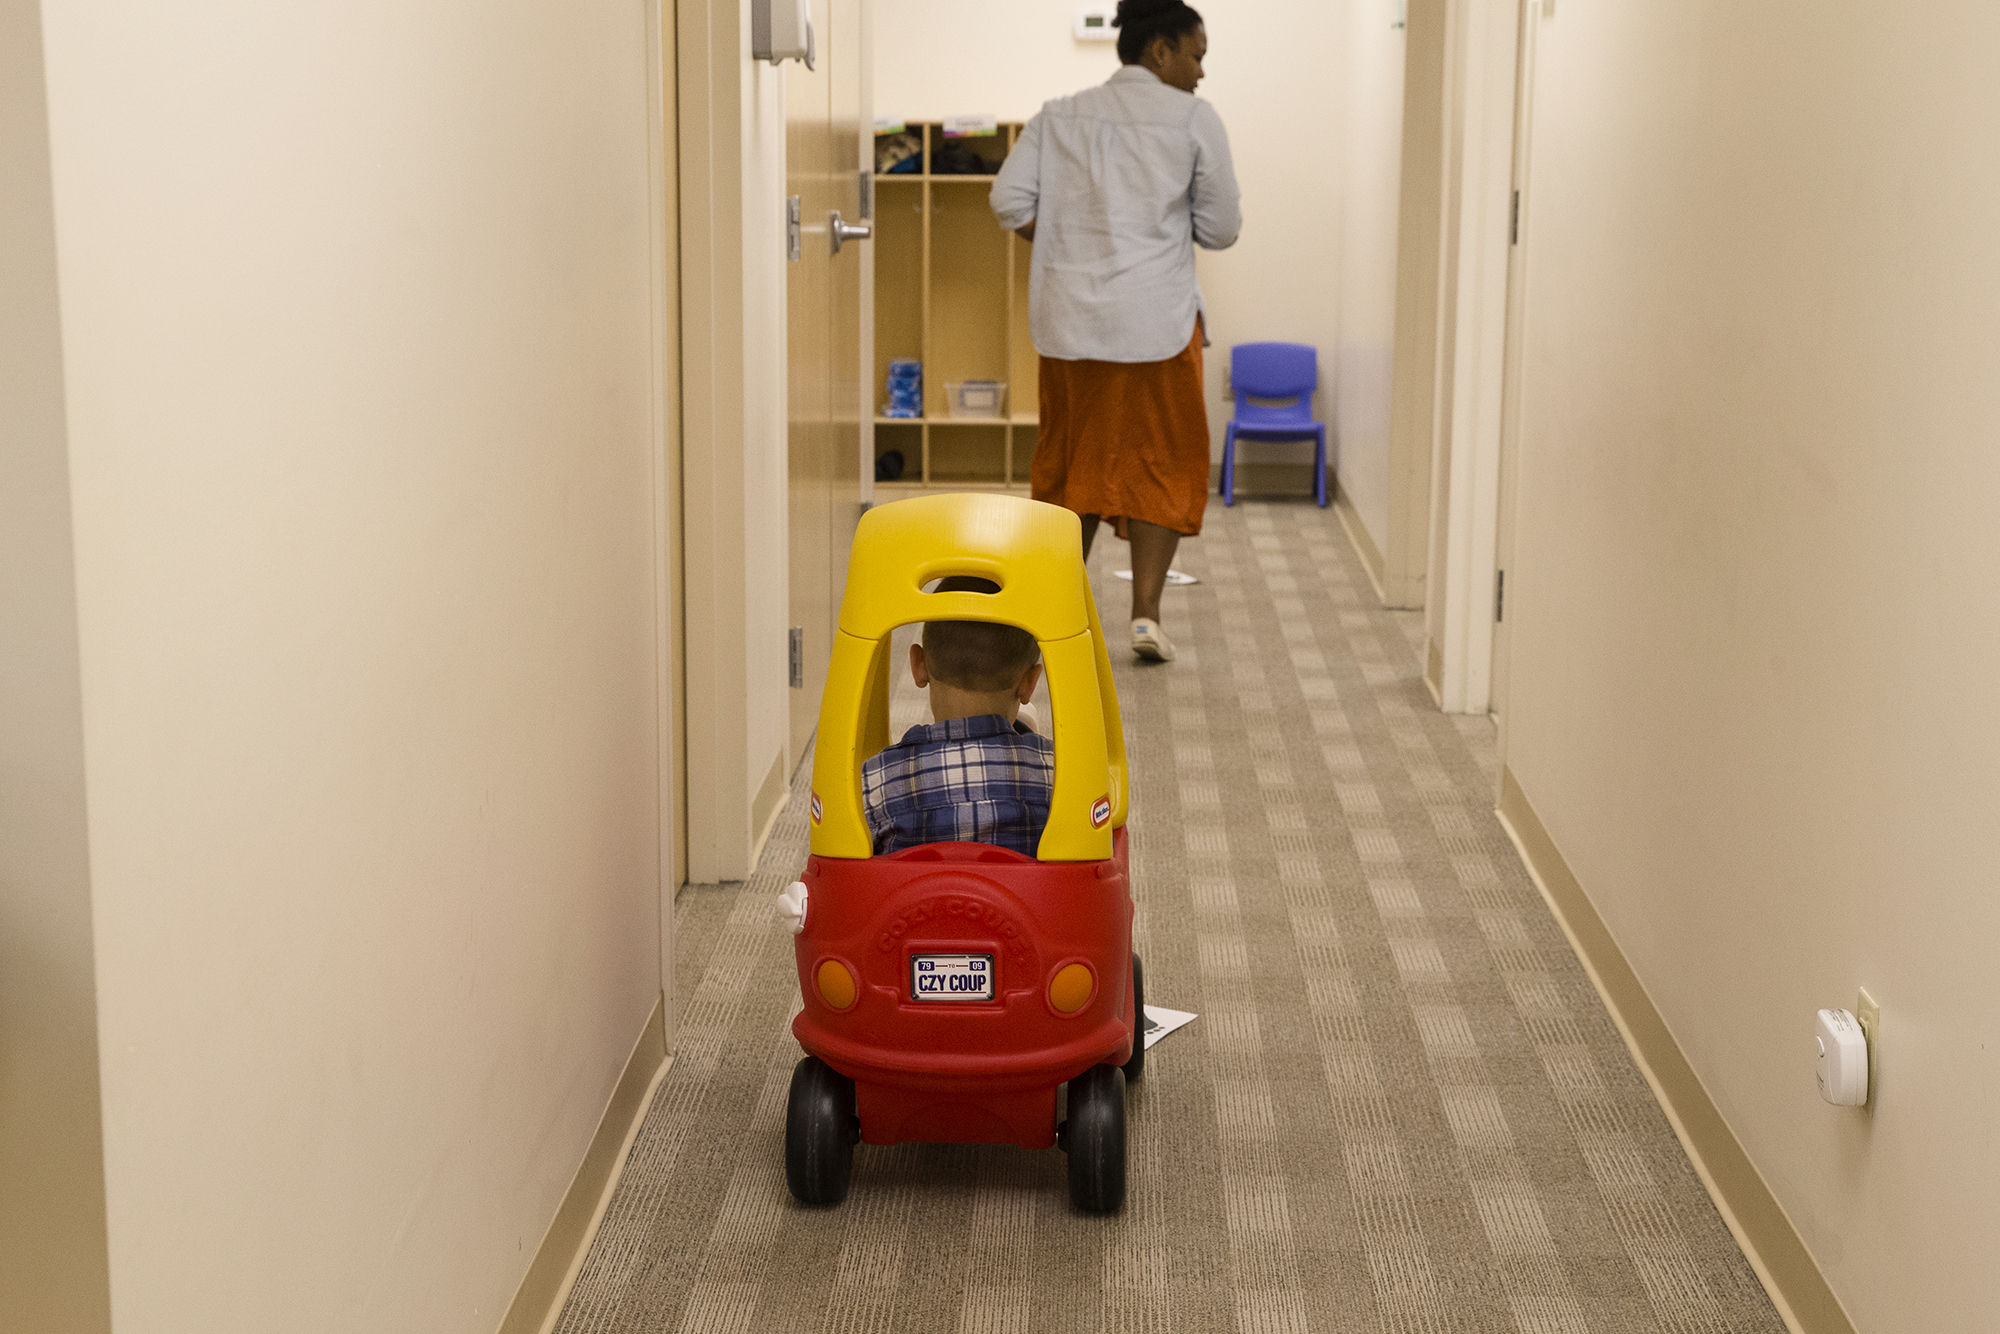 Photo: Owen plays in a yellow and red toy car, following a clinician down a carpeted hallway.